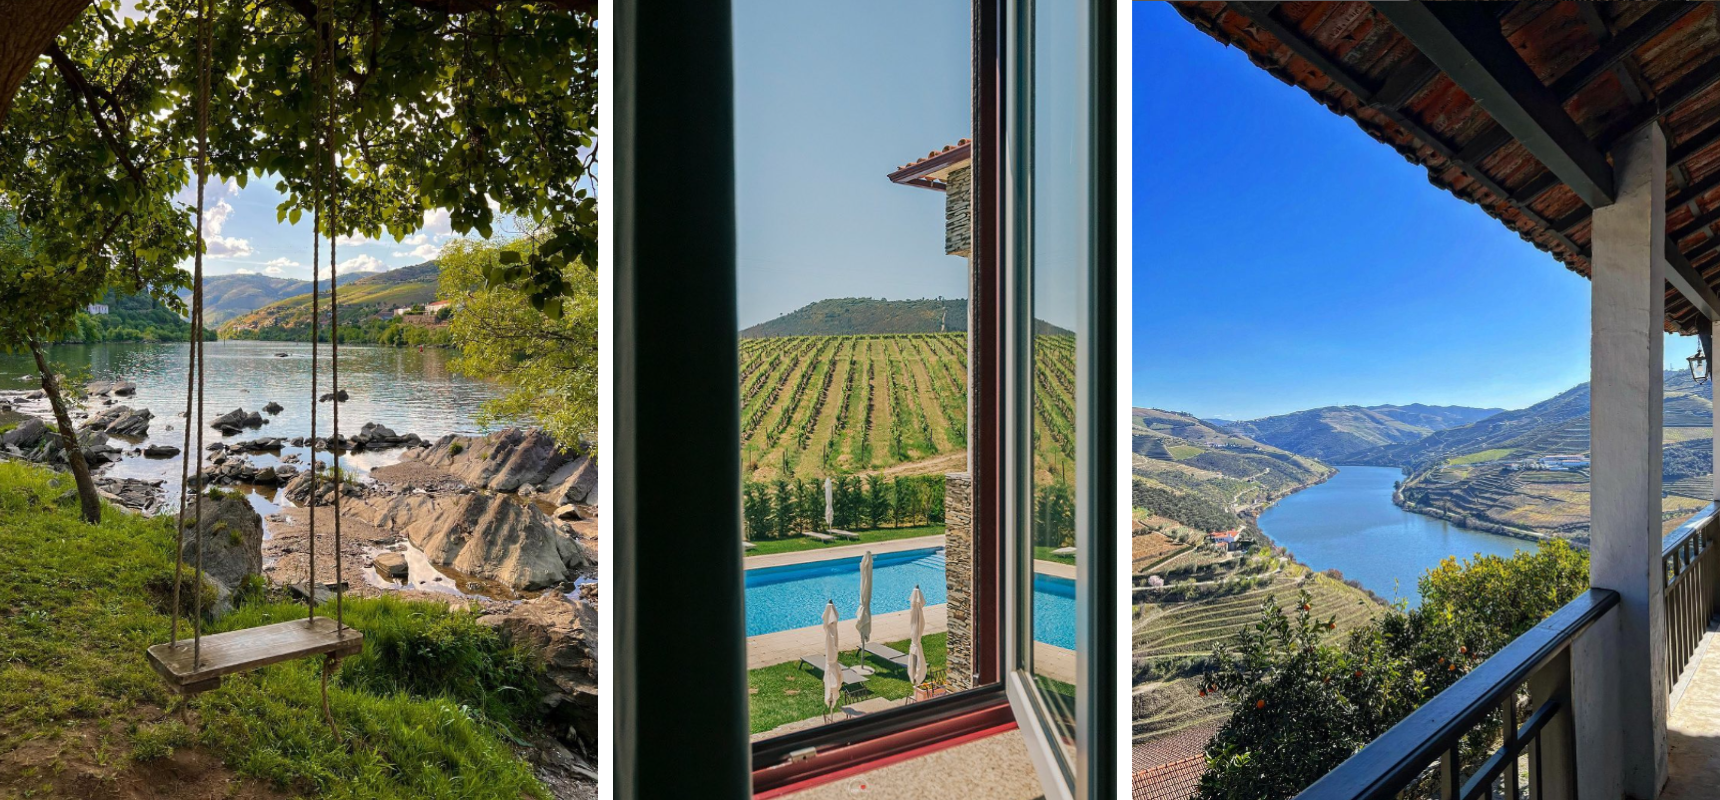 Douro is a Finalist for "Revelation Destination 2024" in the AHRESP Awards